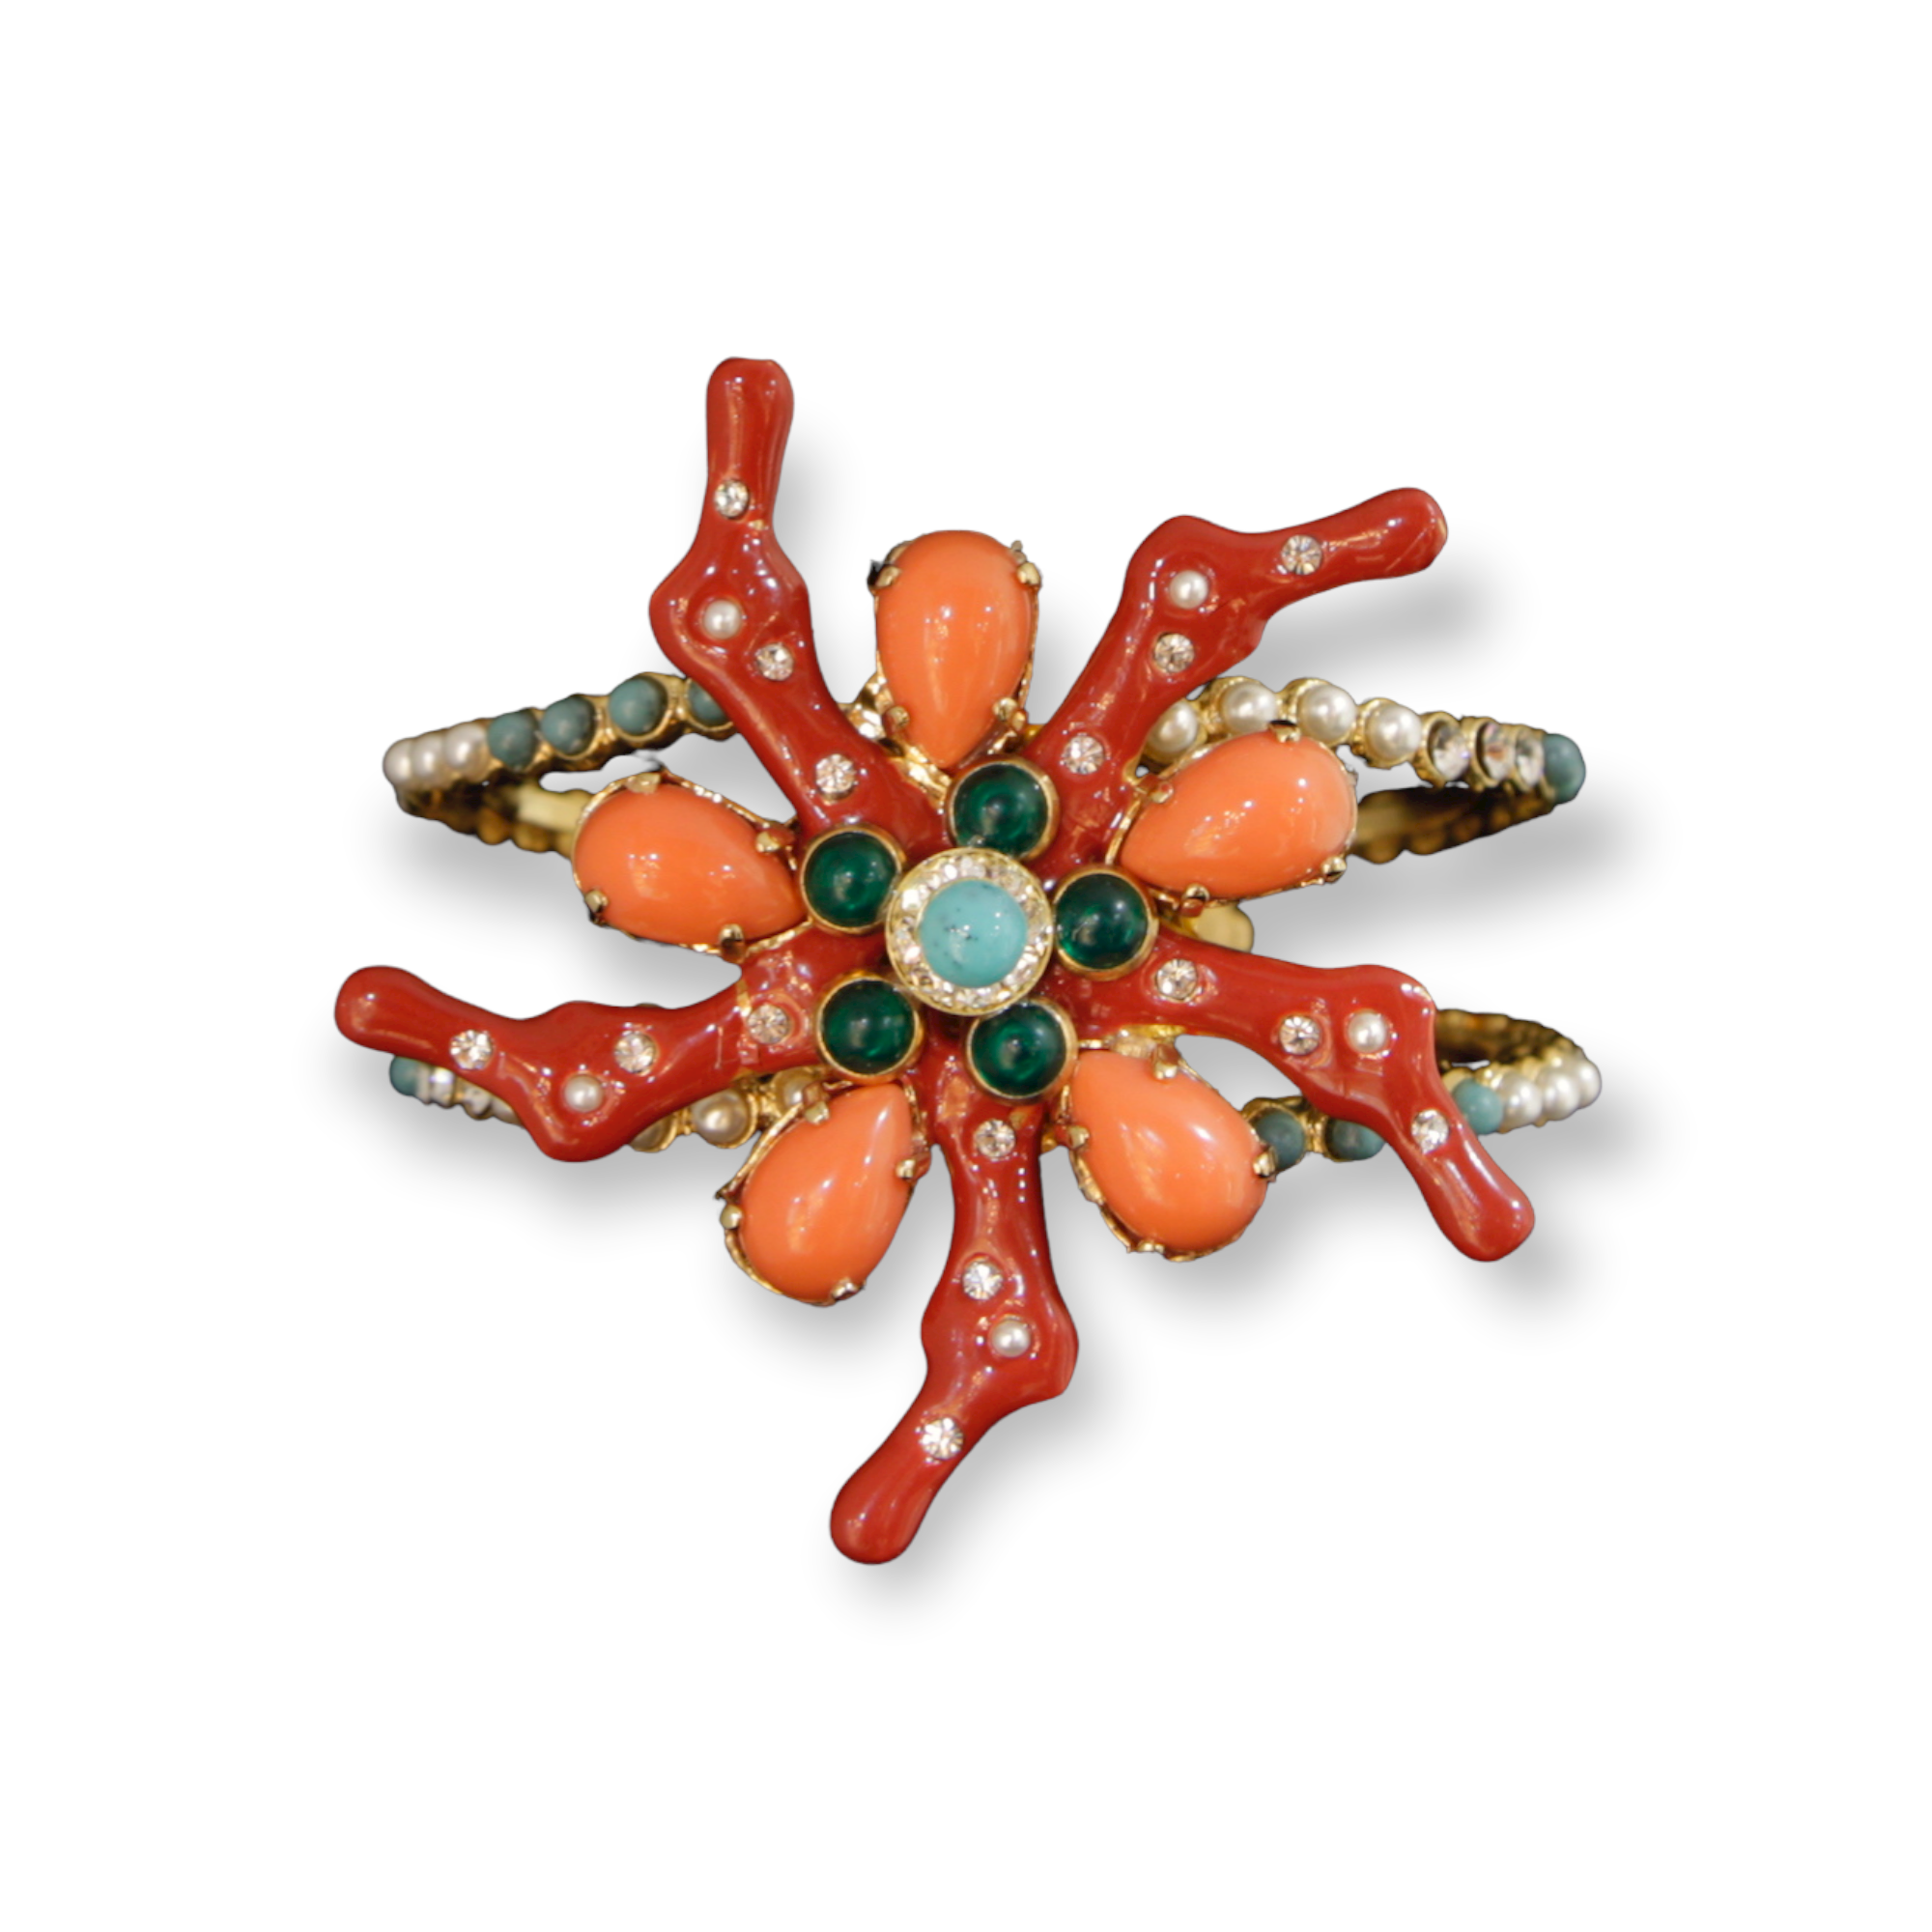 Bracelet with coral theme in the star-shape